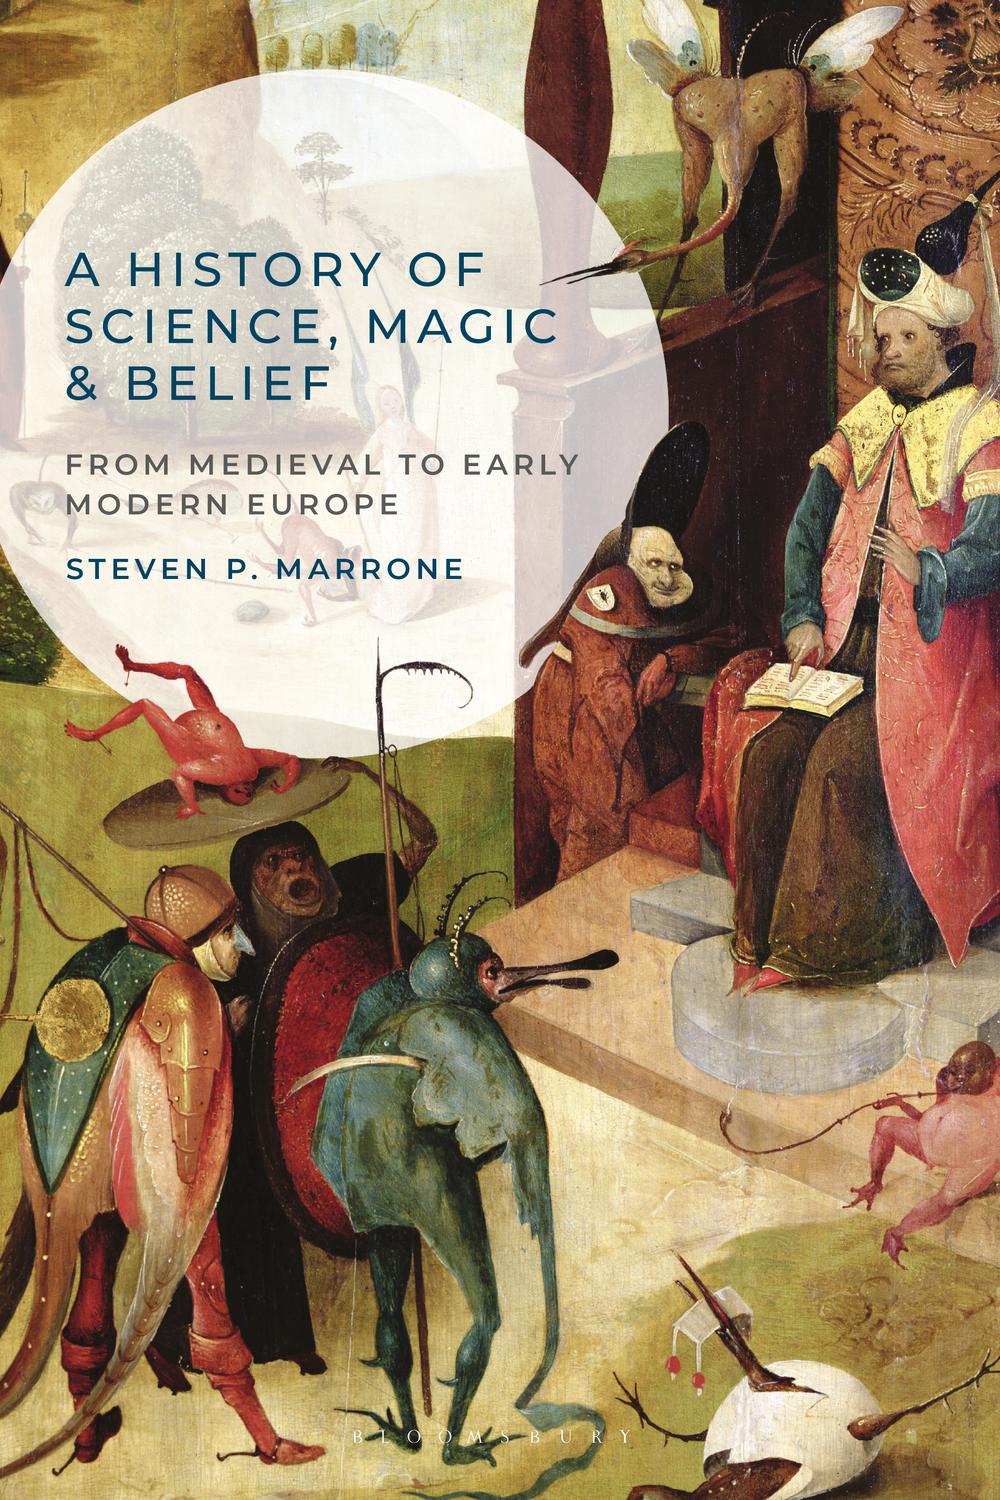 A History of Science, Magic and Belief - Steven P. Marrone